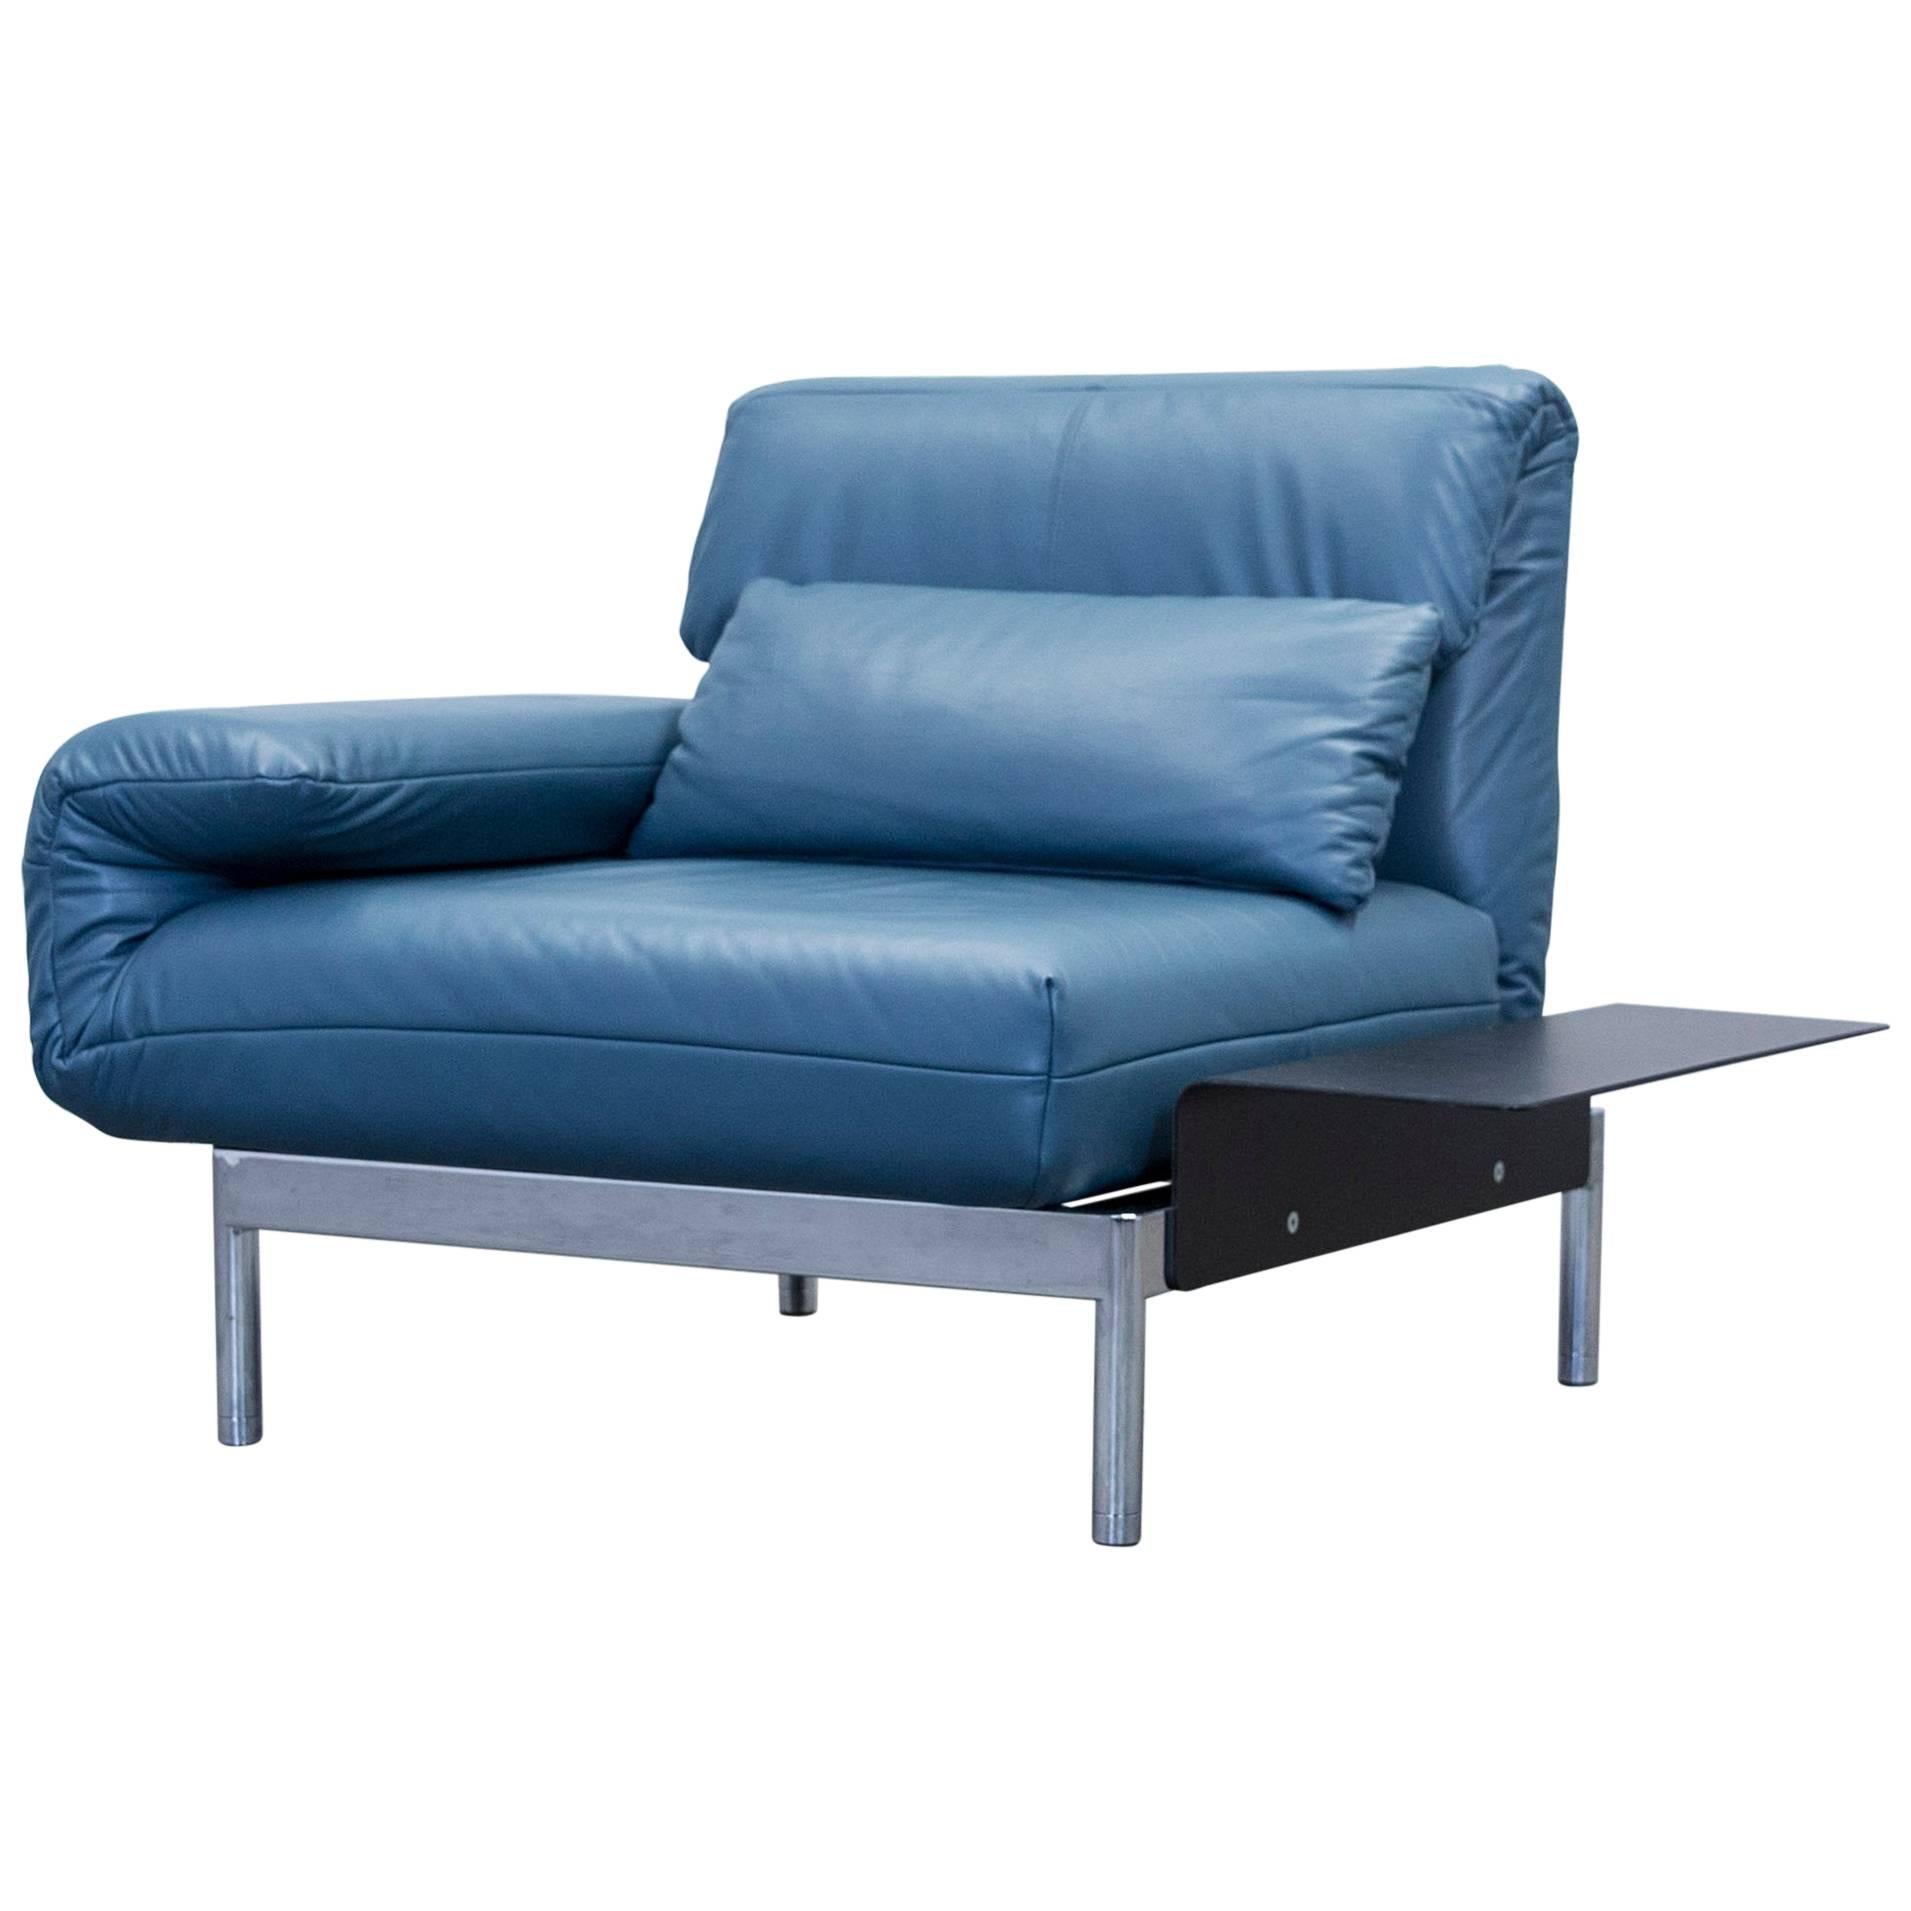 Rolf Benz Plura Designer Chair Leather Blue Function Couch Modern For Sale